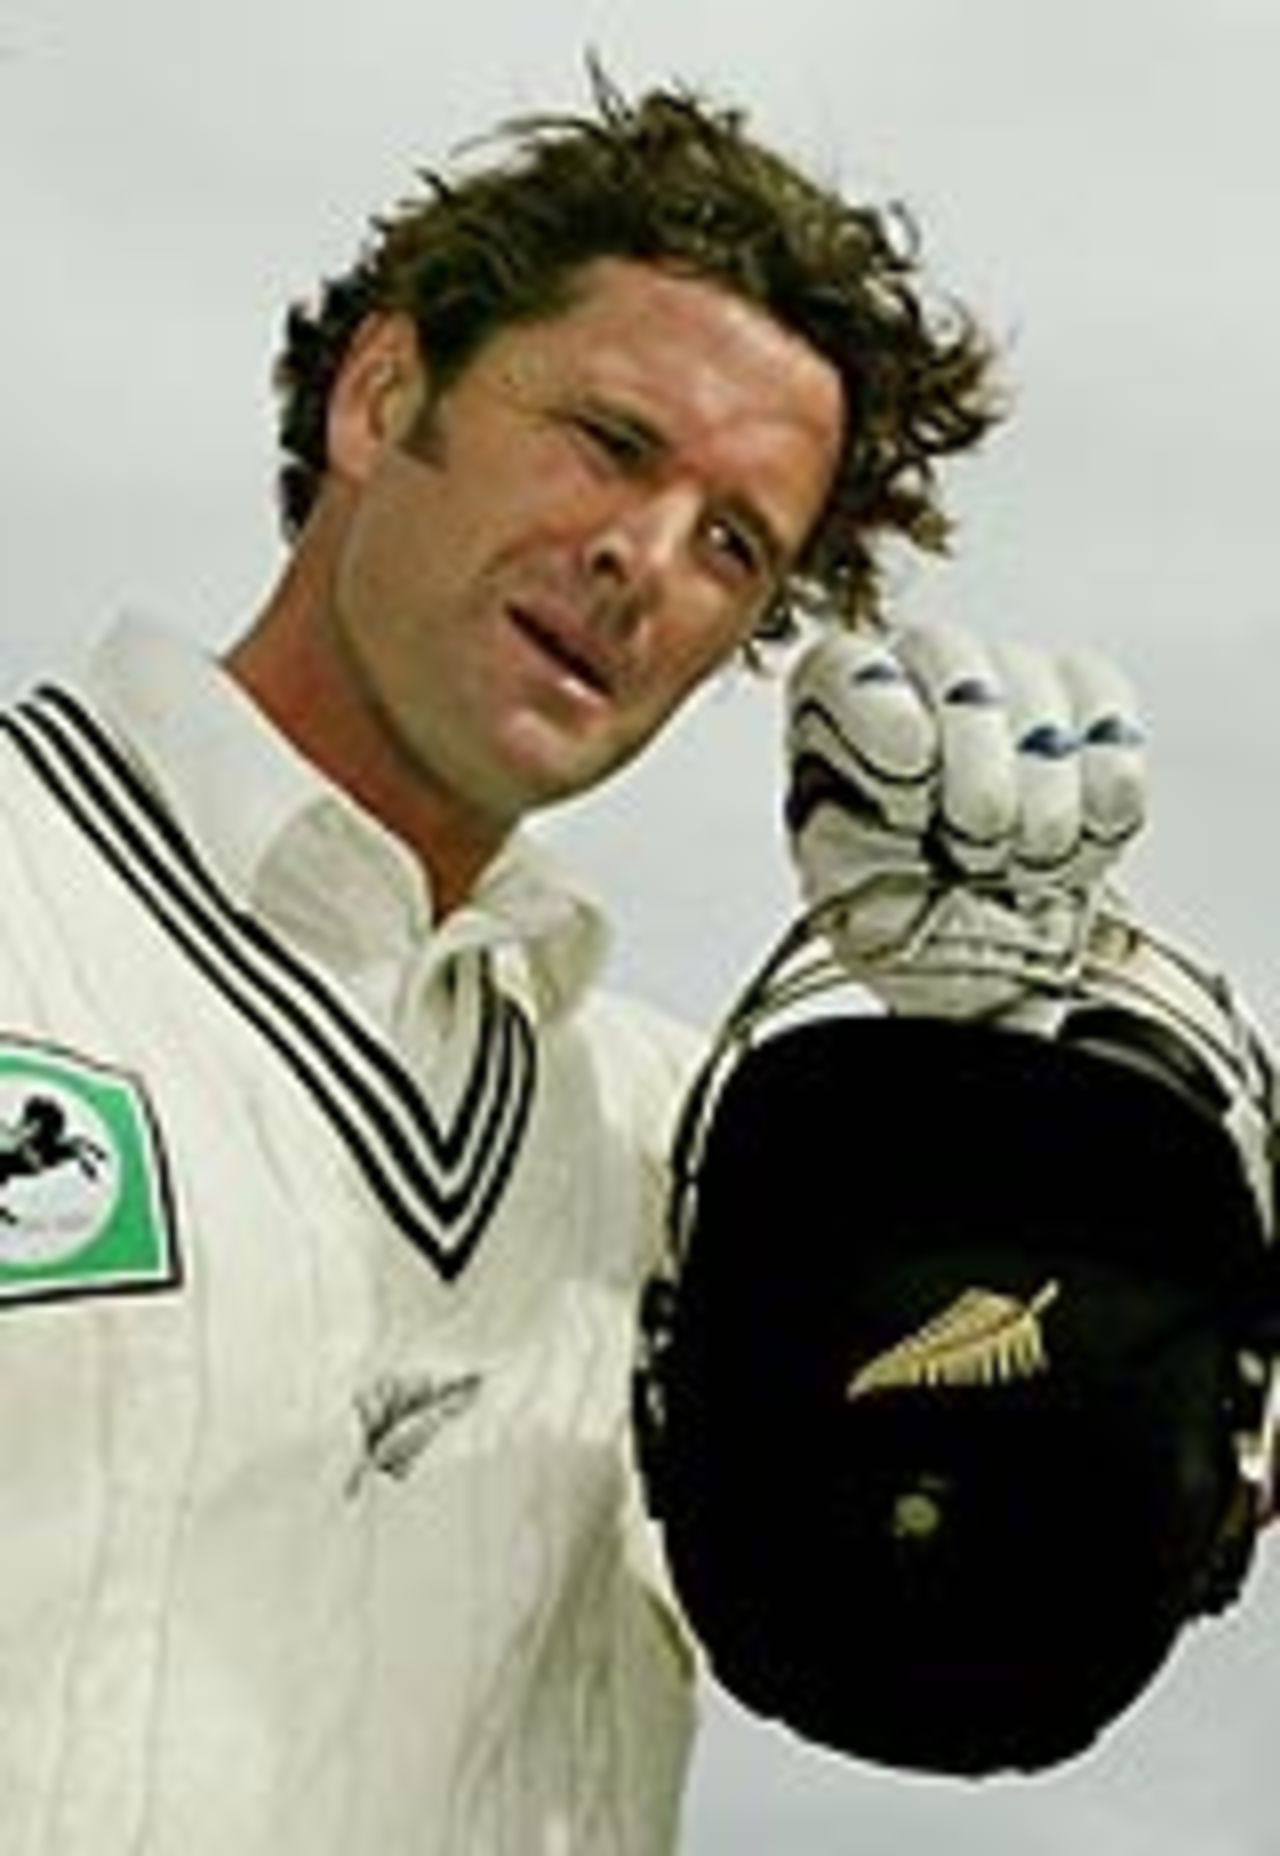 Chris Cairns walks back after being dismissed in the second innings at Wellington, New Zealand v South Africa, 3rd Test, Wellington, 4th day, March 29, 2004